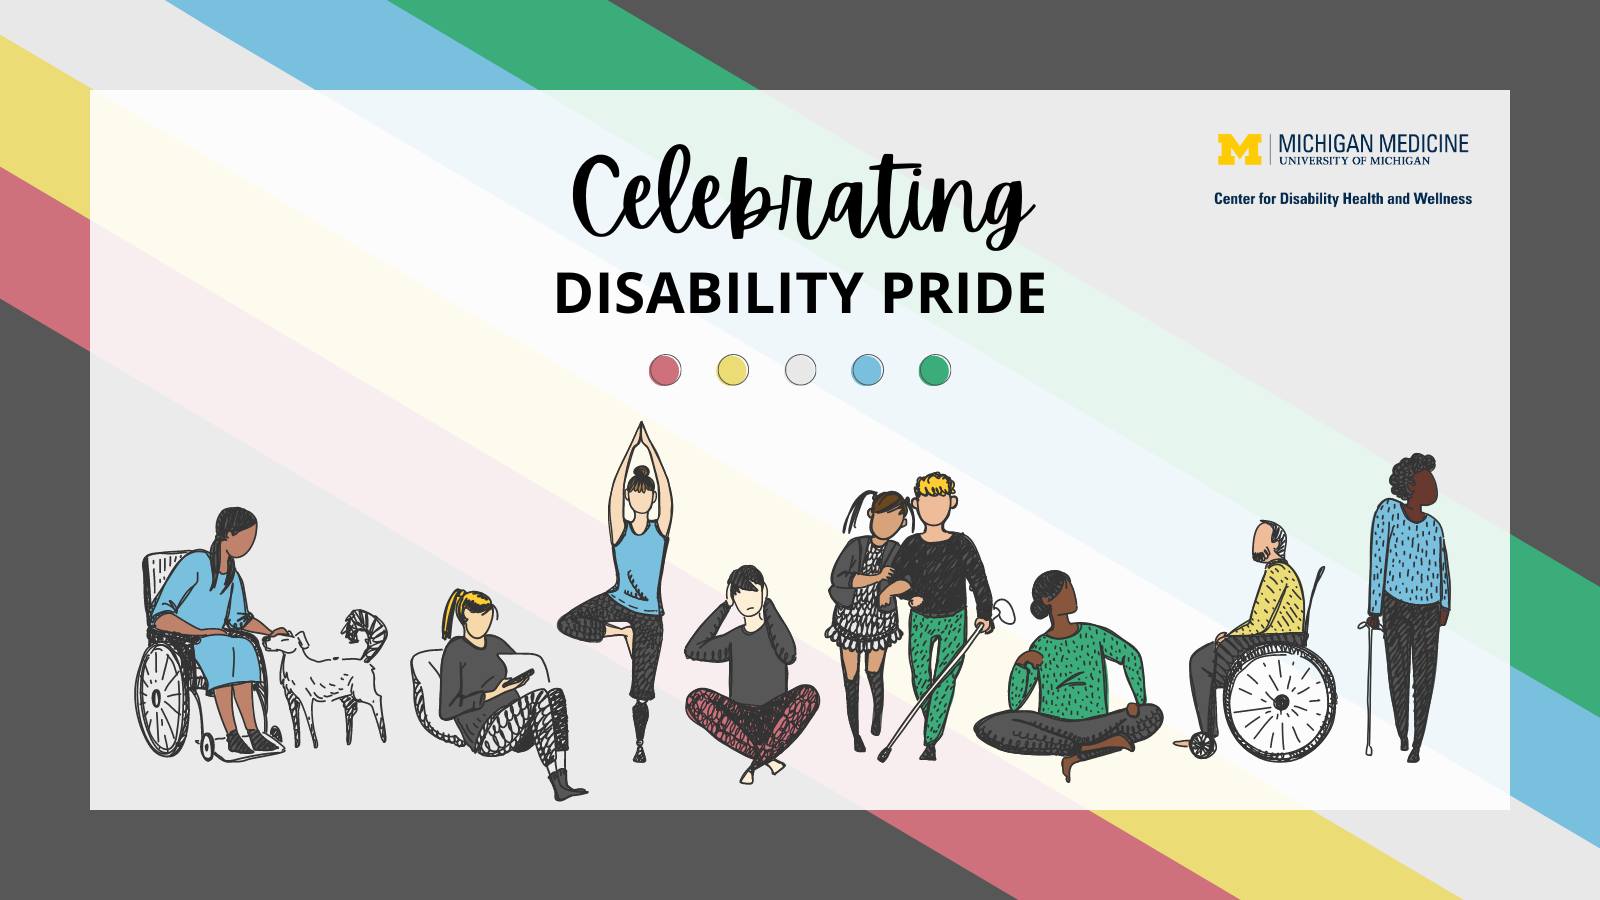 Celebrating Disability Pride graphic created by U-M CDHW. Overlaid on the Disability Pride flag is the U-M CDHW logo, text that says "Celebrating Disability Pride" and an illustration depicting various types of disabilities.